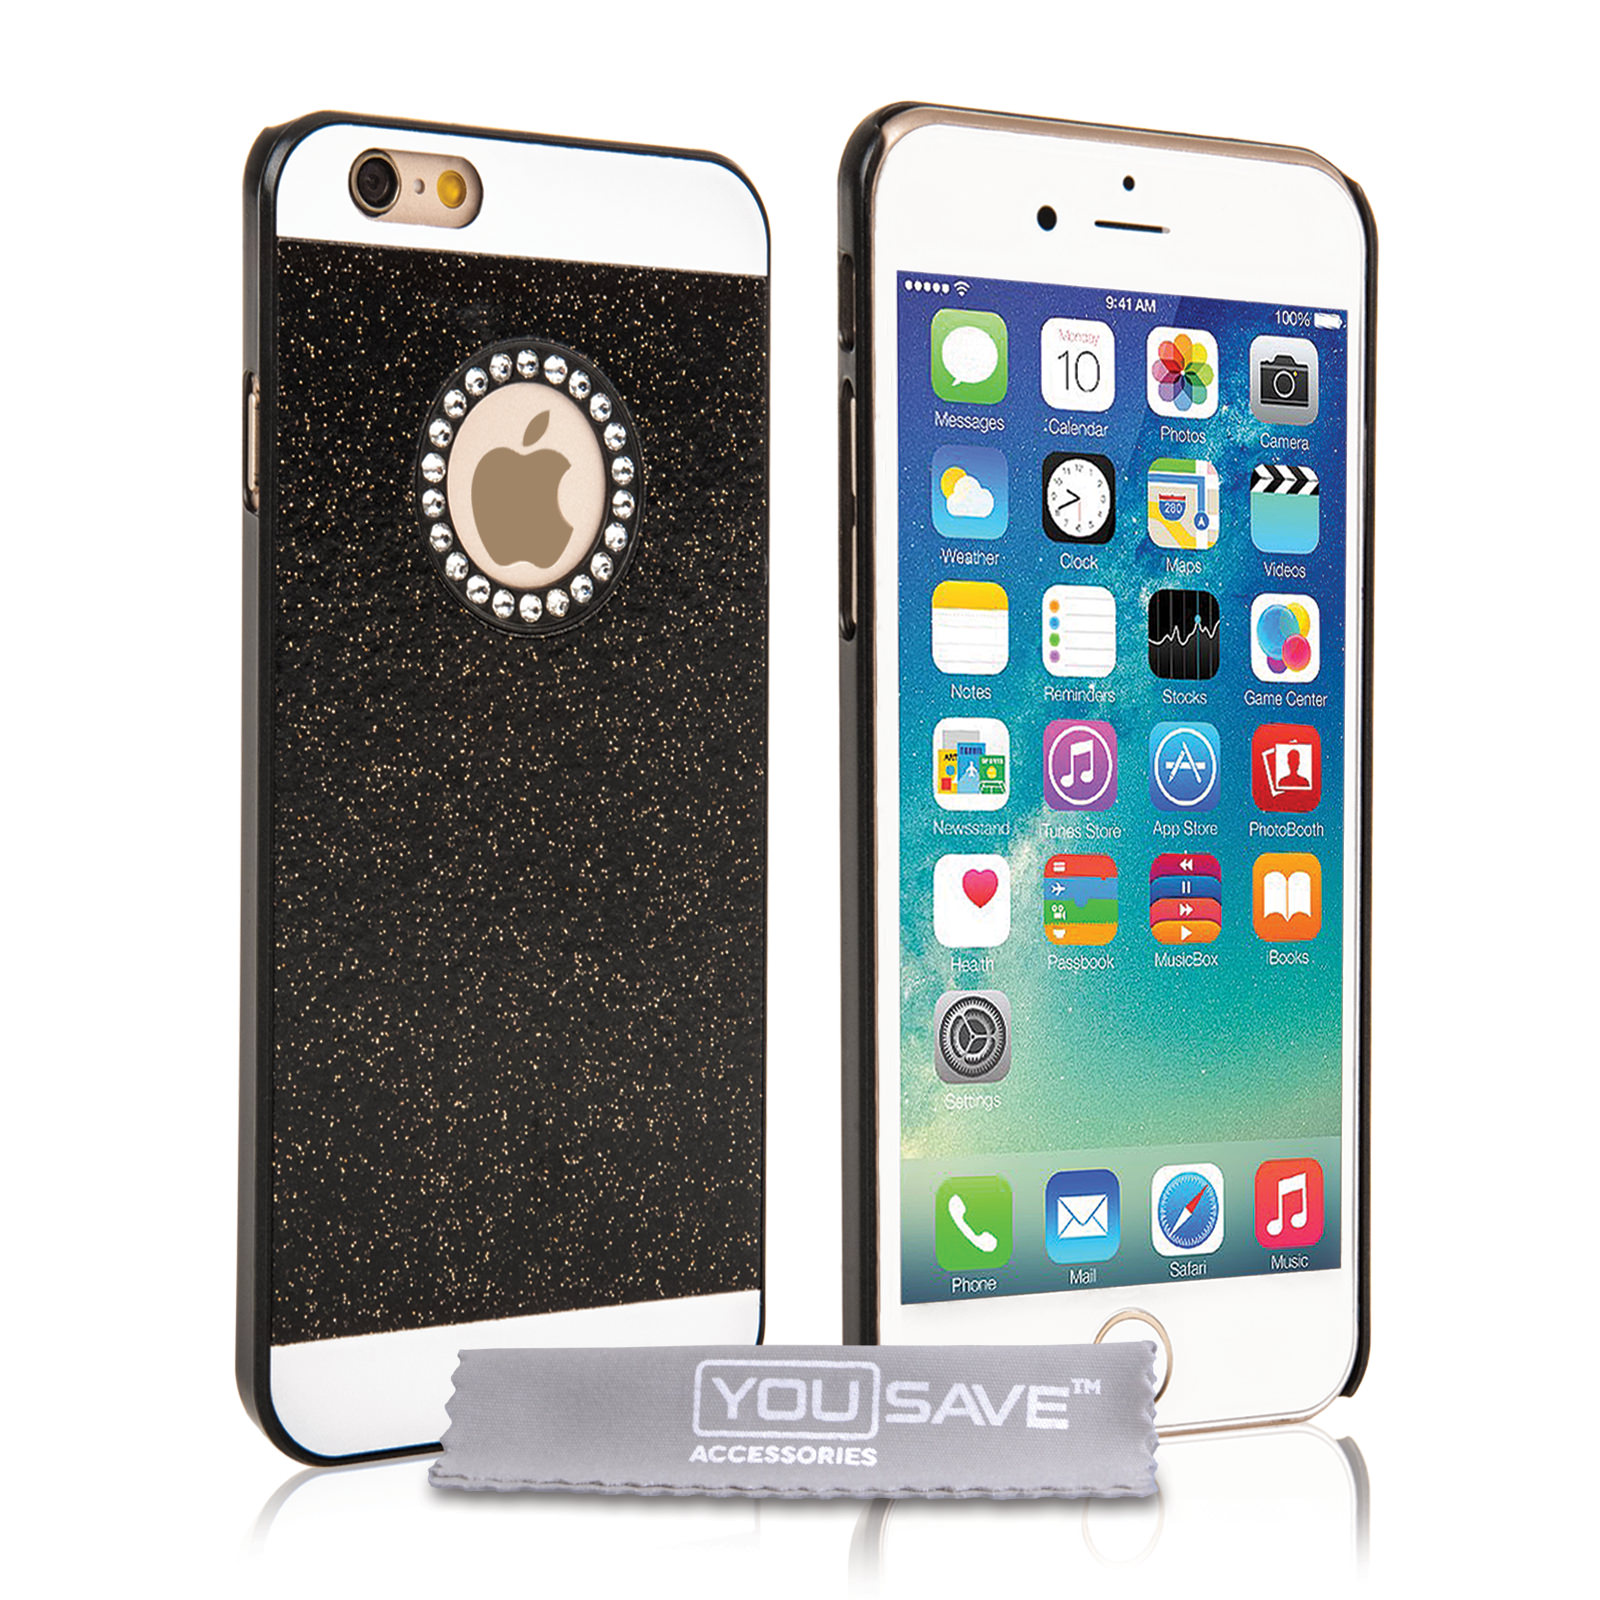 Yousave Accessories iPhone 6 and 6s Flash Diamond Case - Black